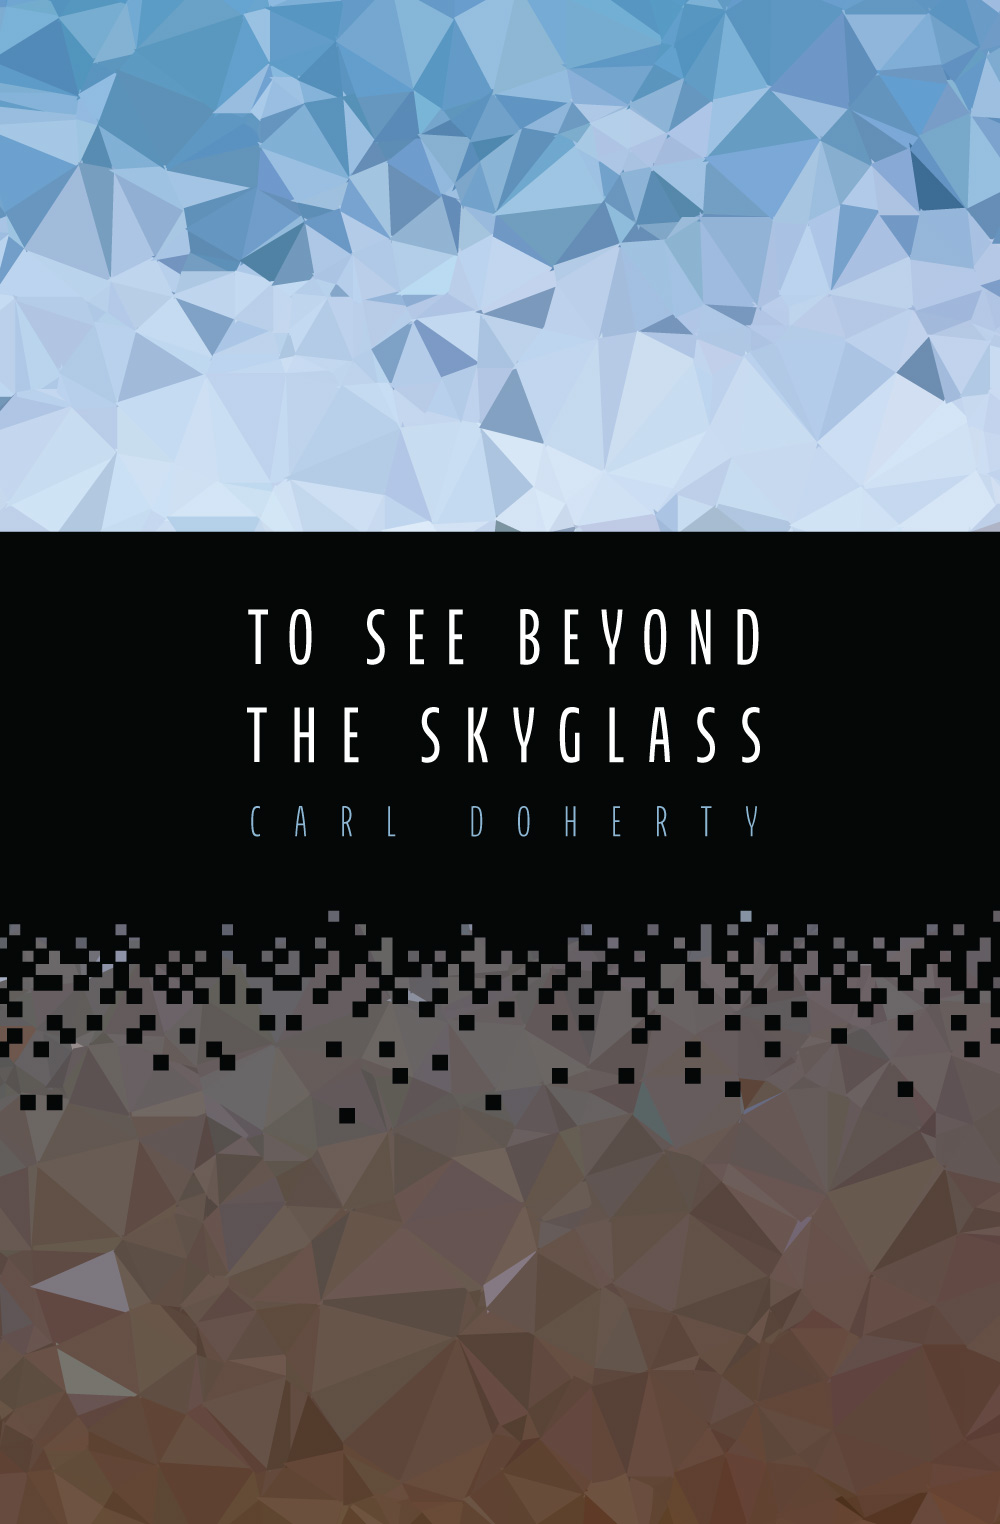 Sci-fi Horror Short ‘To See Beyond the Skyglass’ is Out Now and Free to Read